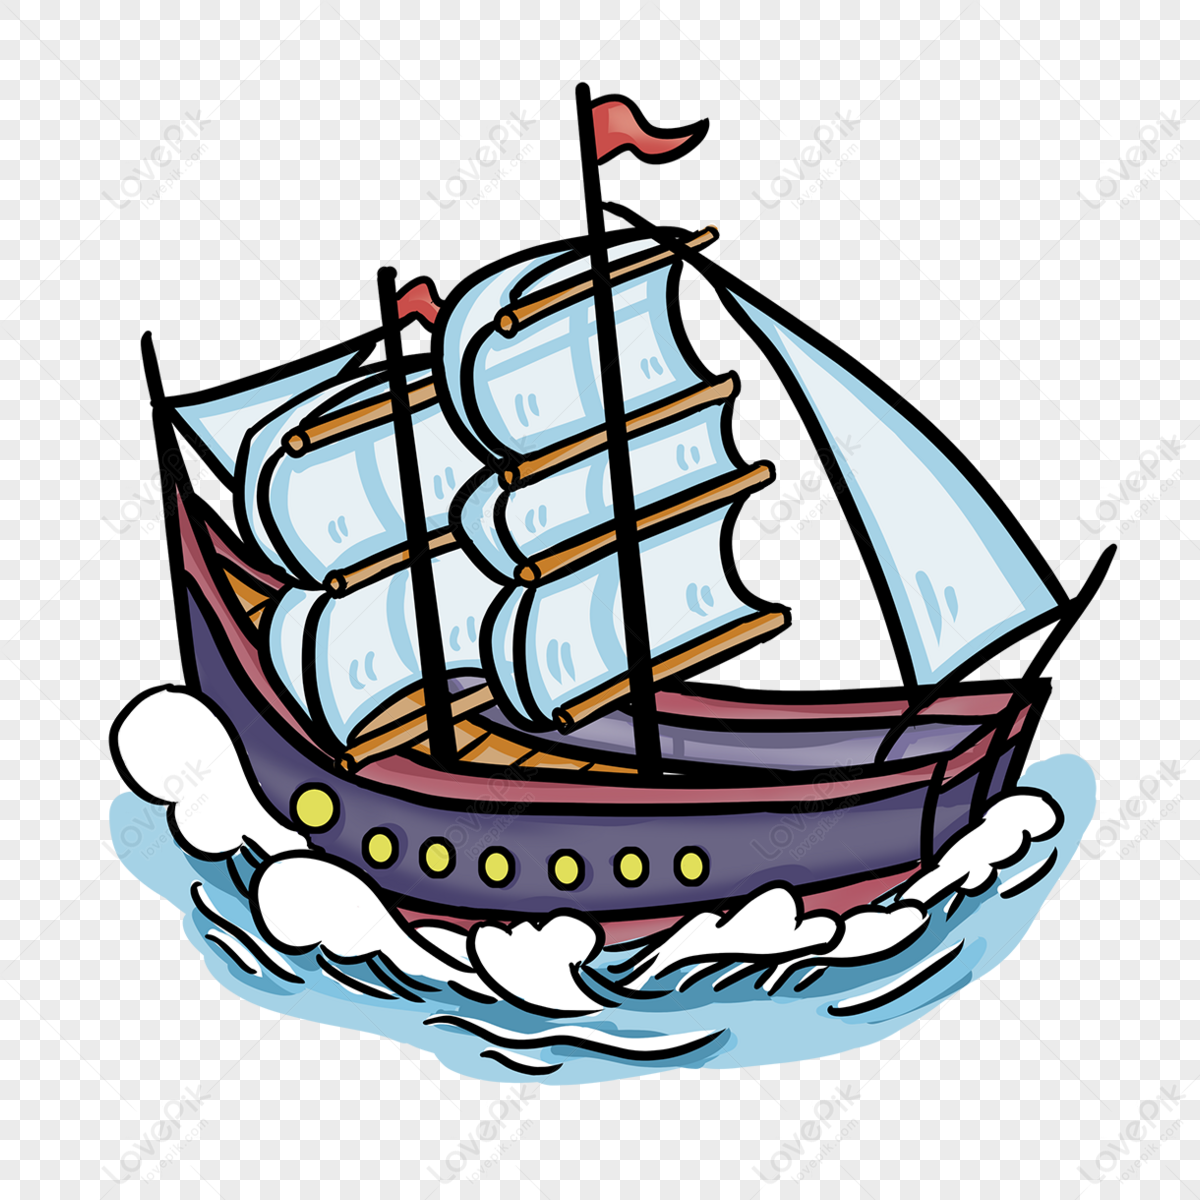 Cartoon style purple clipart sailboat,drawing,mast,spray png image